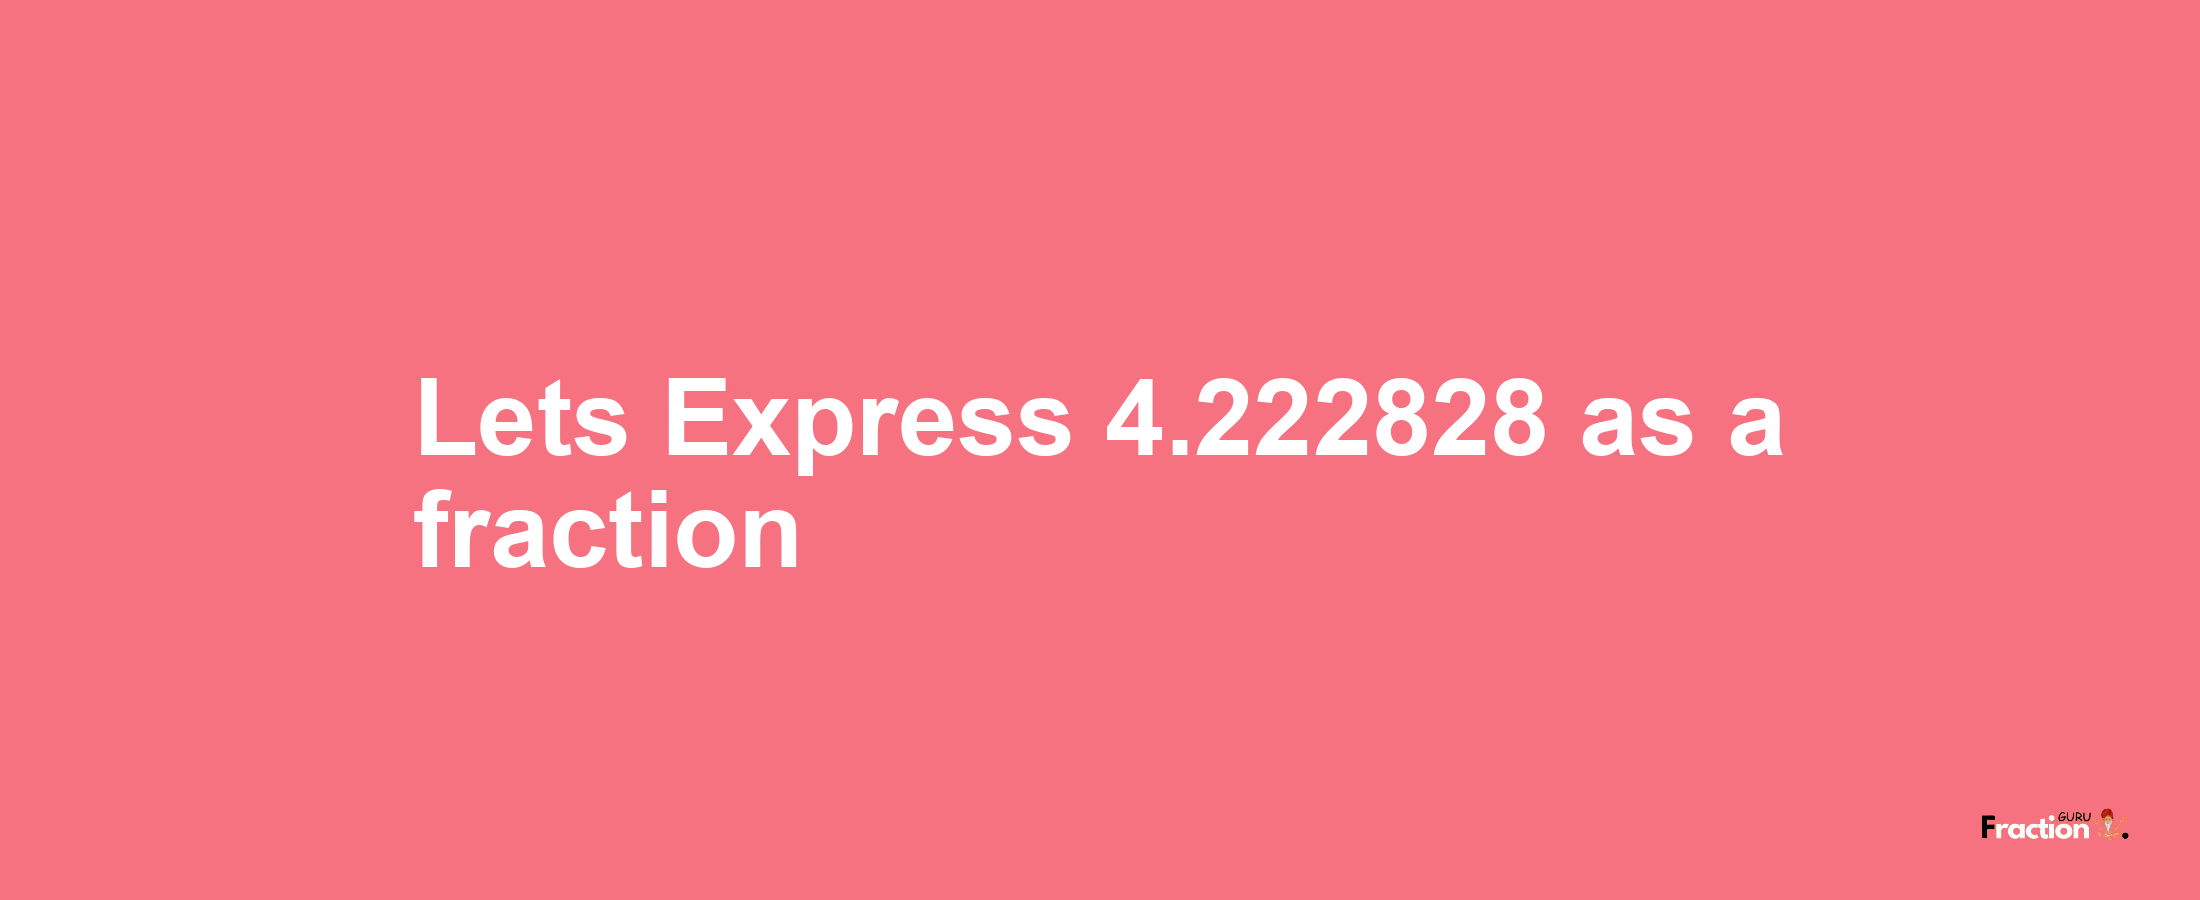 Lets Express 4.222828 as afraction